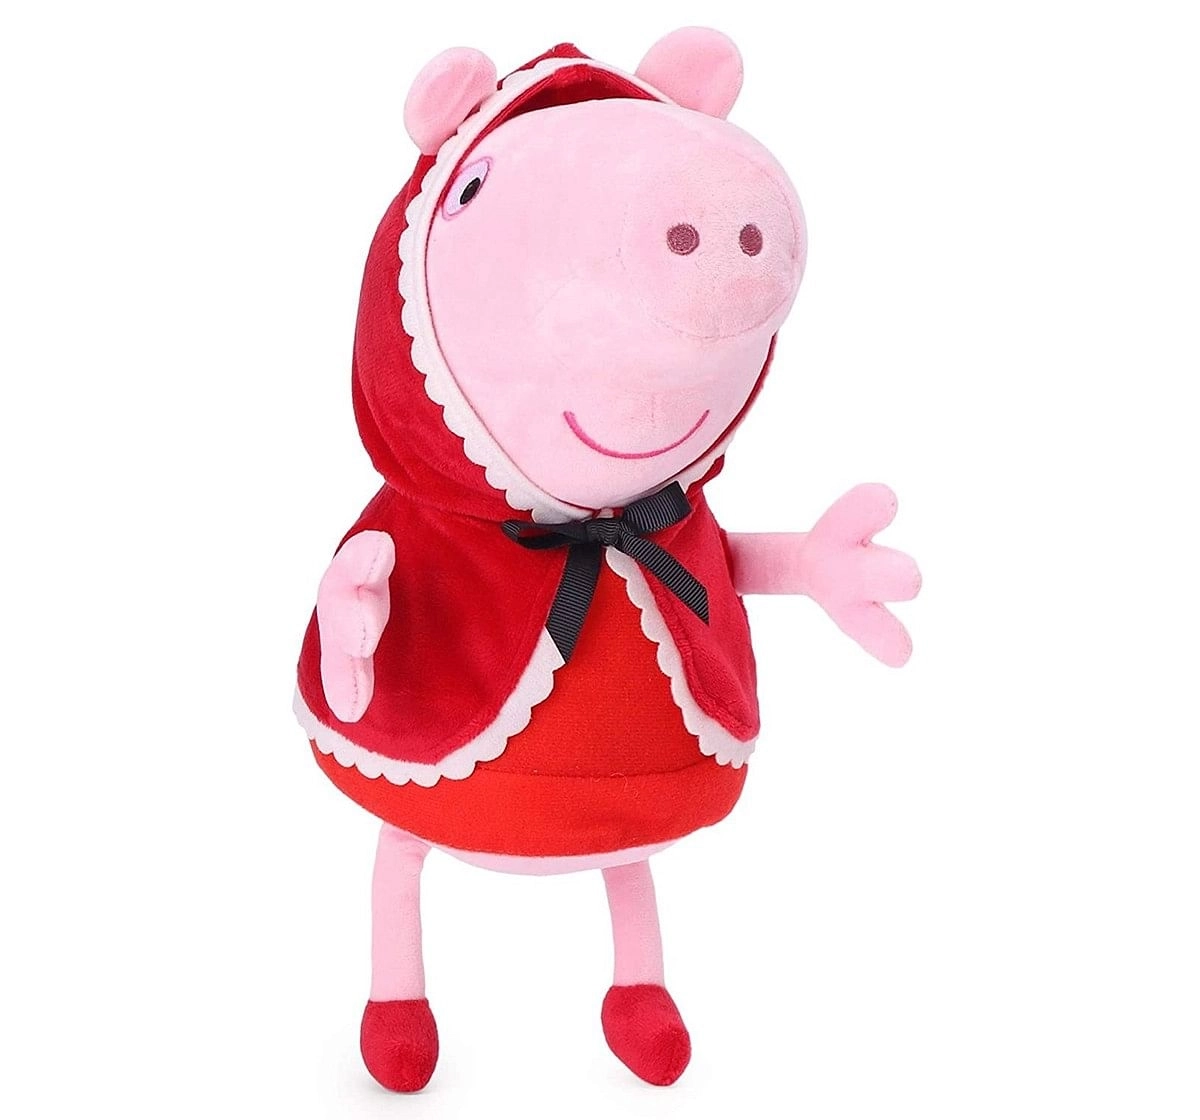  Peppa Pig In Little Red Riding Hood Costume for age 1Y+ - 30 Cm 